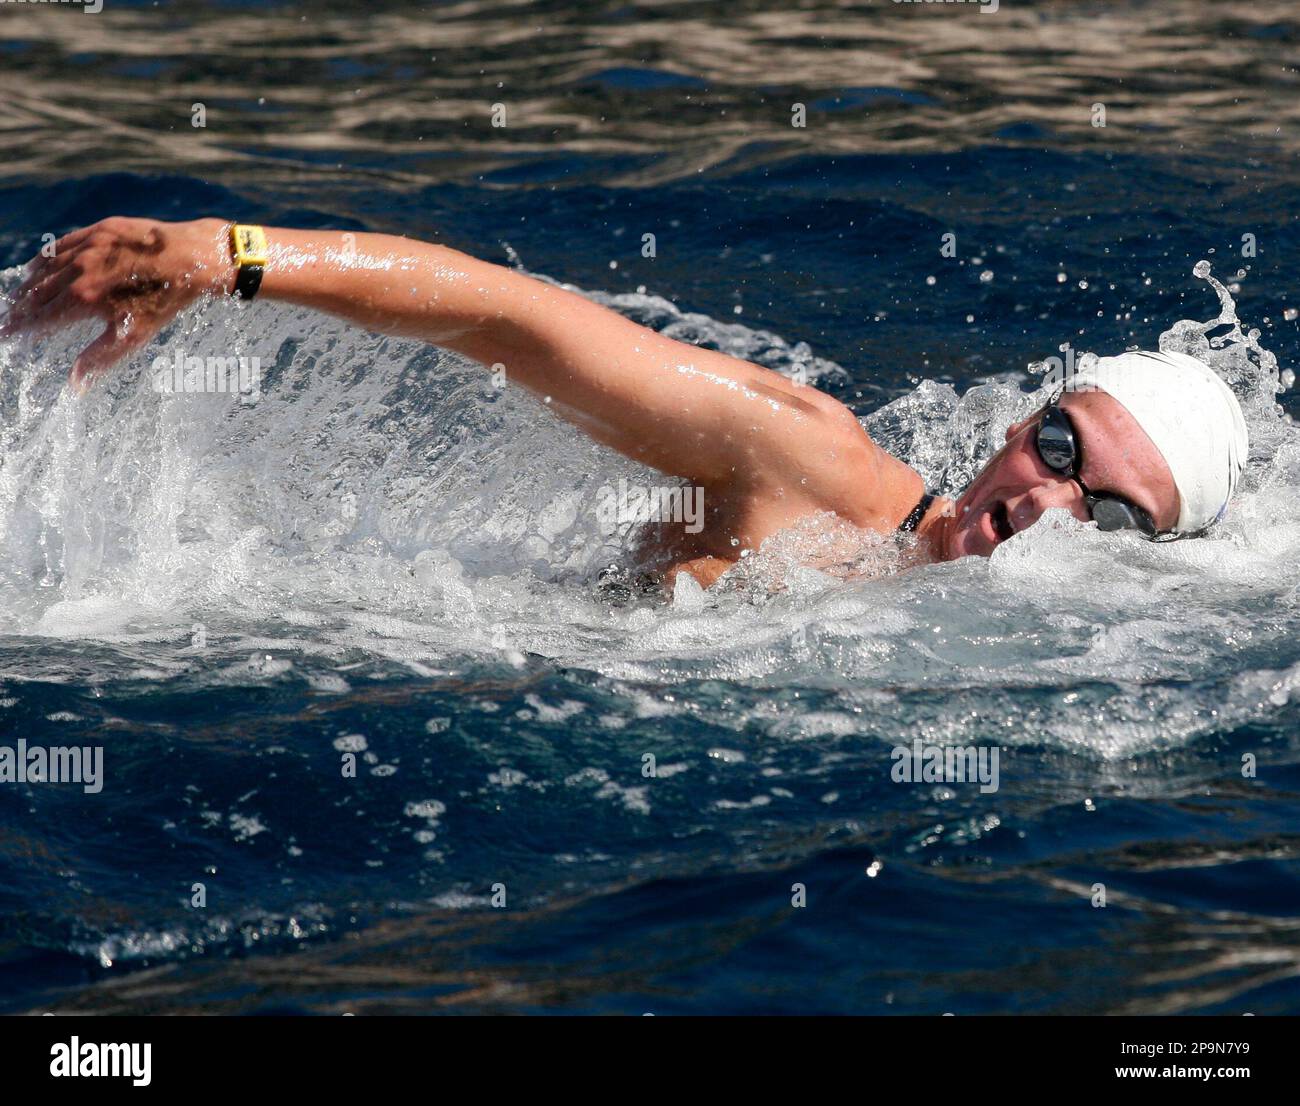 Edith Van Dijk of Netherlands swims to the fourth place in 10 km women's  race at 11th European Open Water Swimming Championship in Dubrovnik,  Croatia, Wednesday, Sept. 10 2008. Larisa Ilchenko of